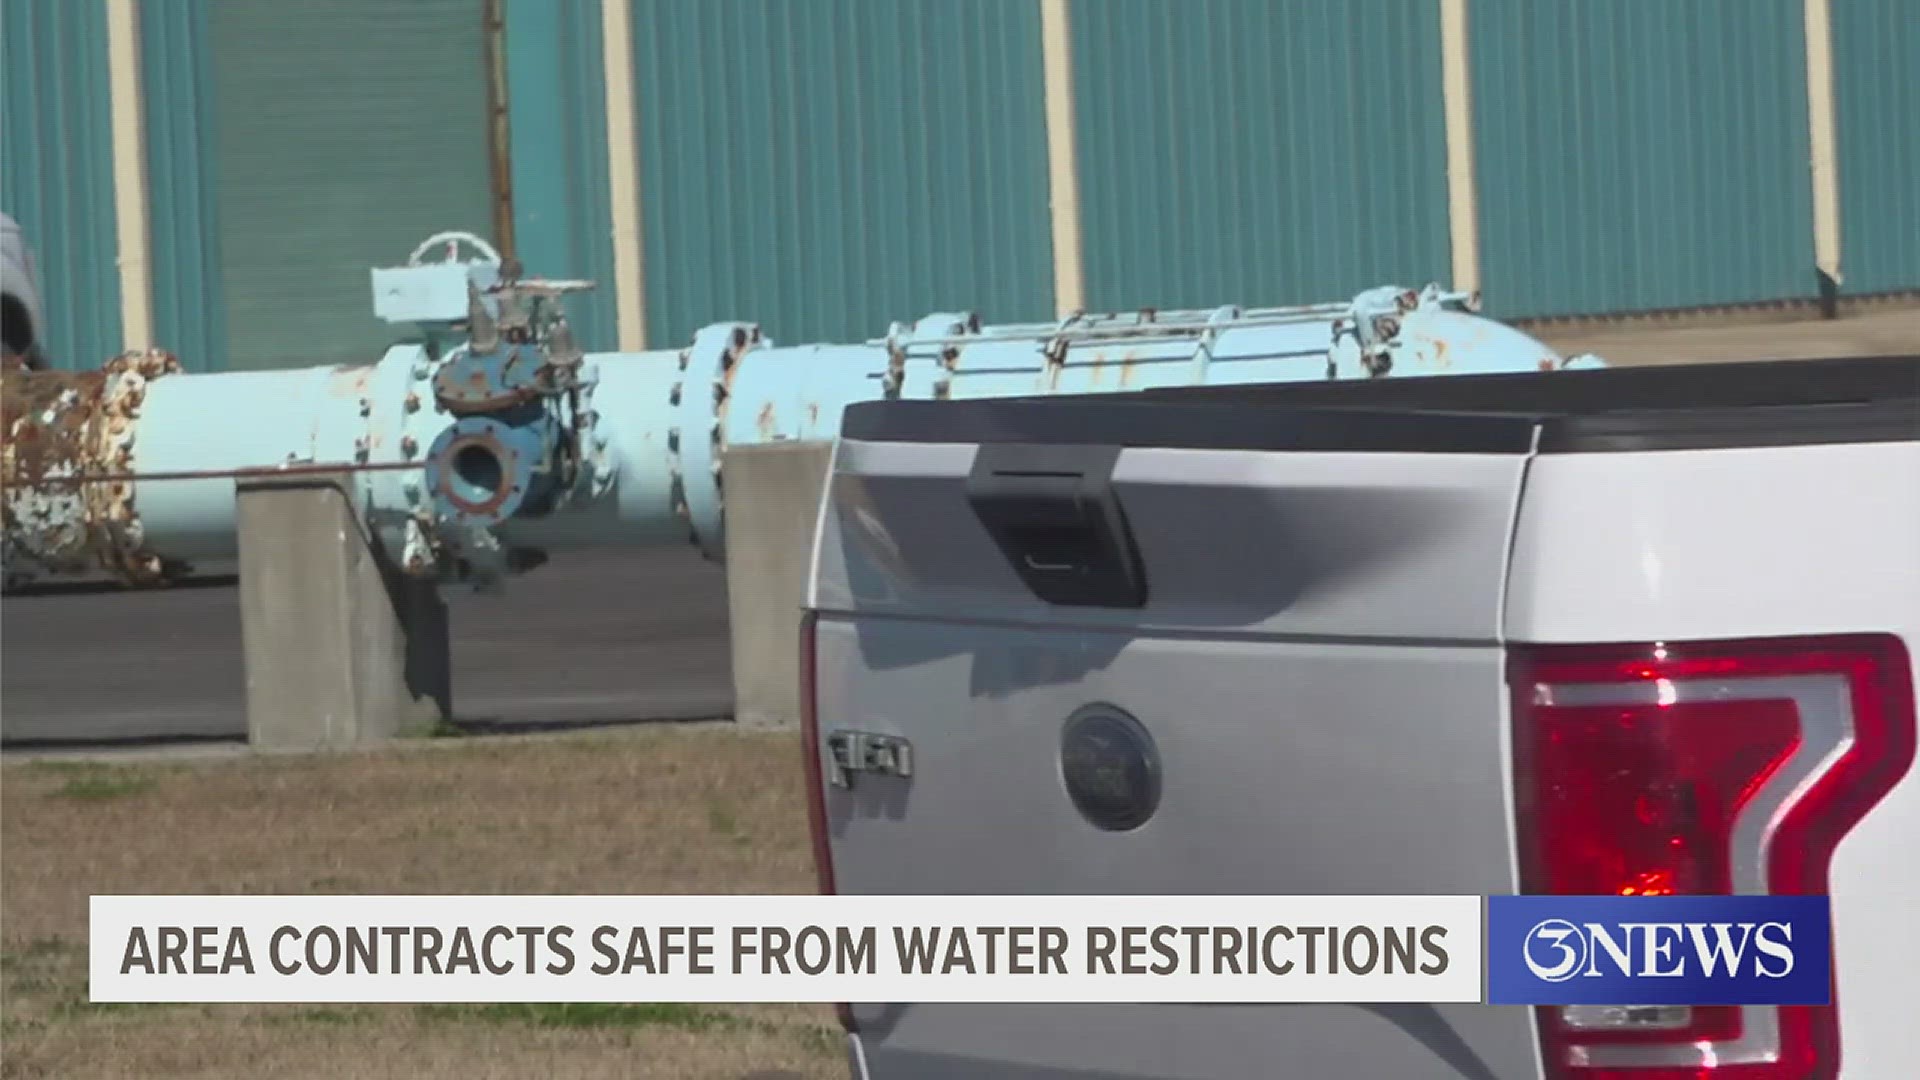 The city has contracts with surrounding areas to provide water. City officials said drought restrictions will not impact the service to these areas.